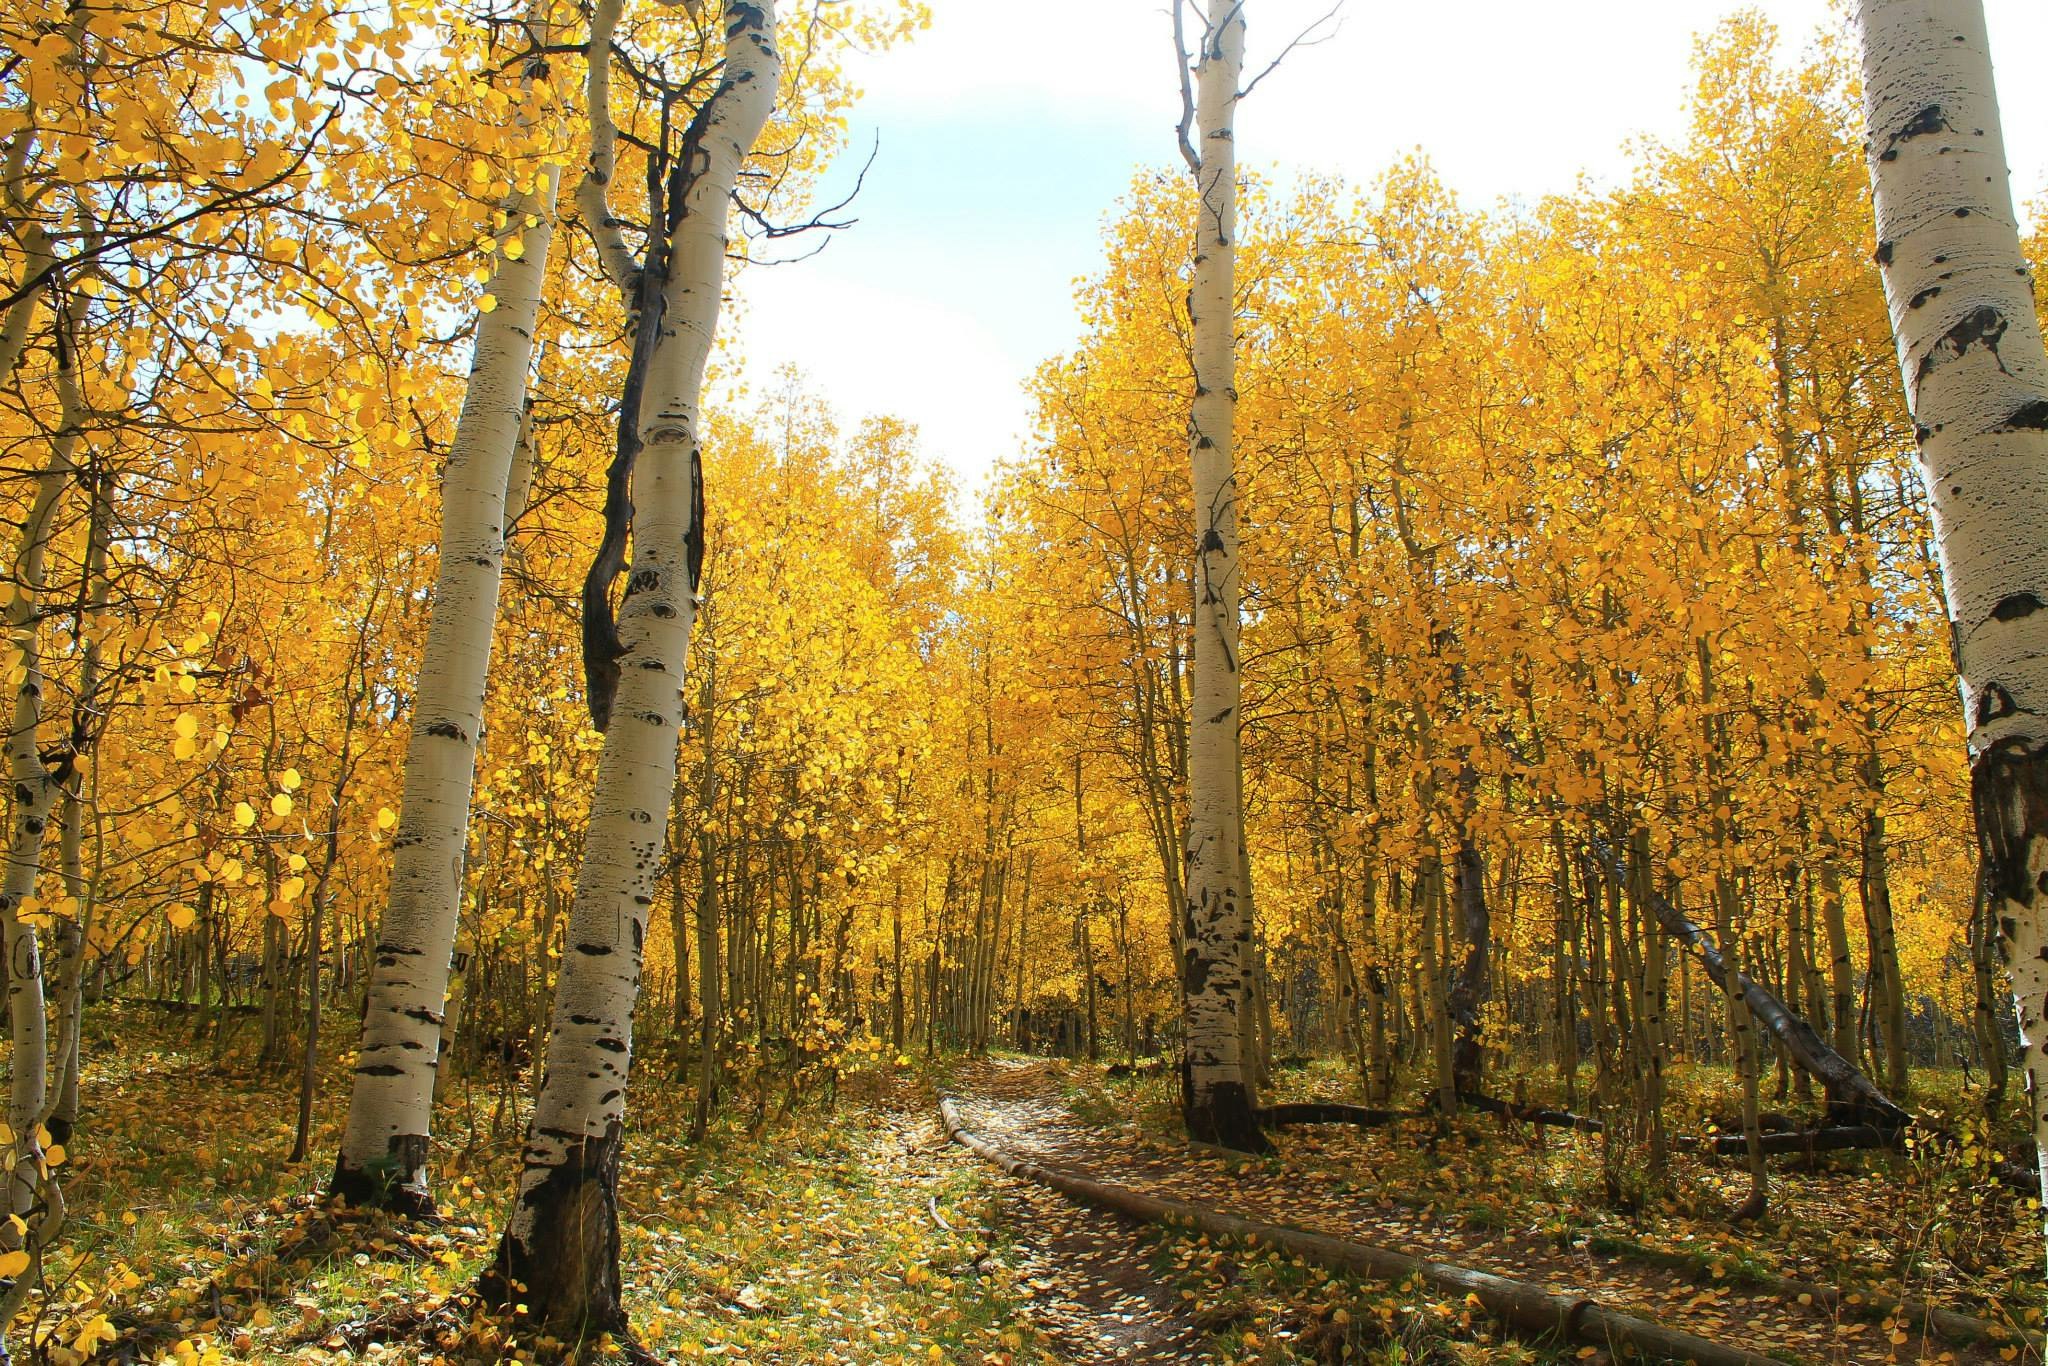 Pando, the Most Massive Organism on Earth, Is Shrinking